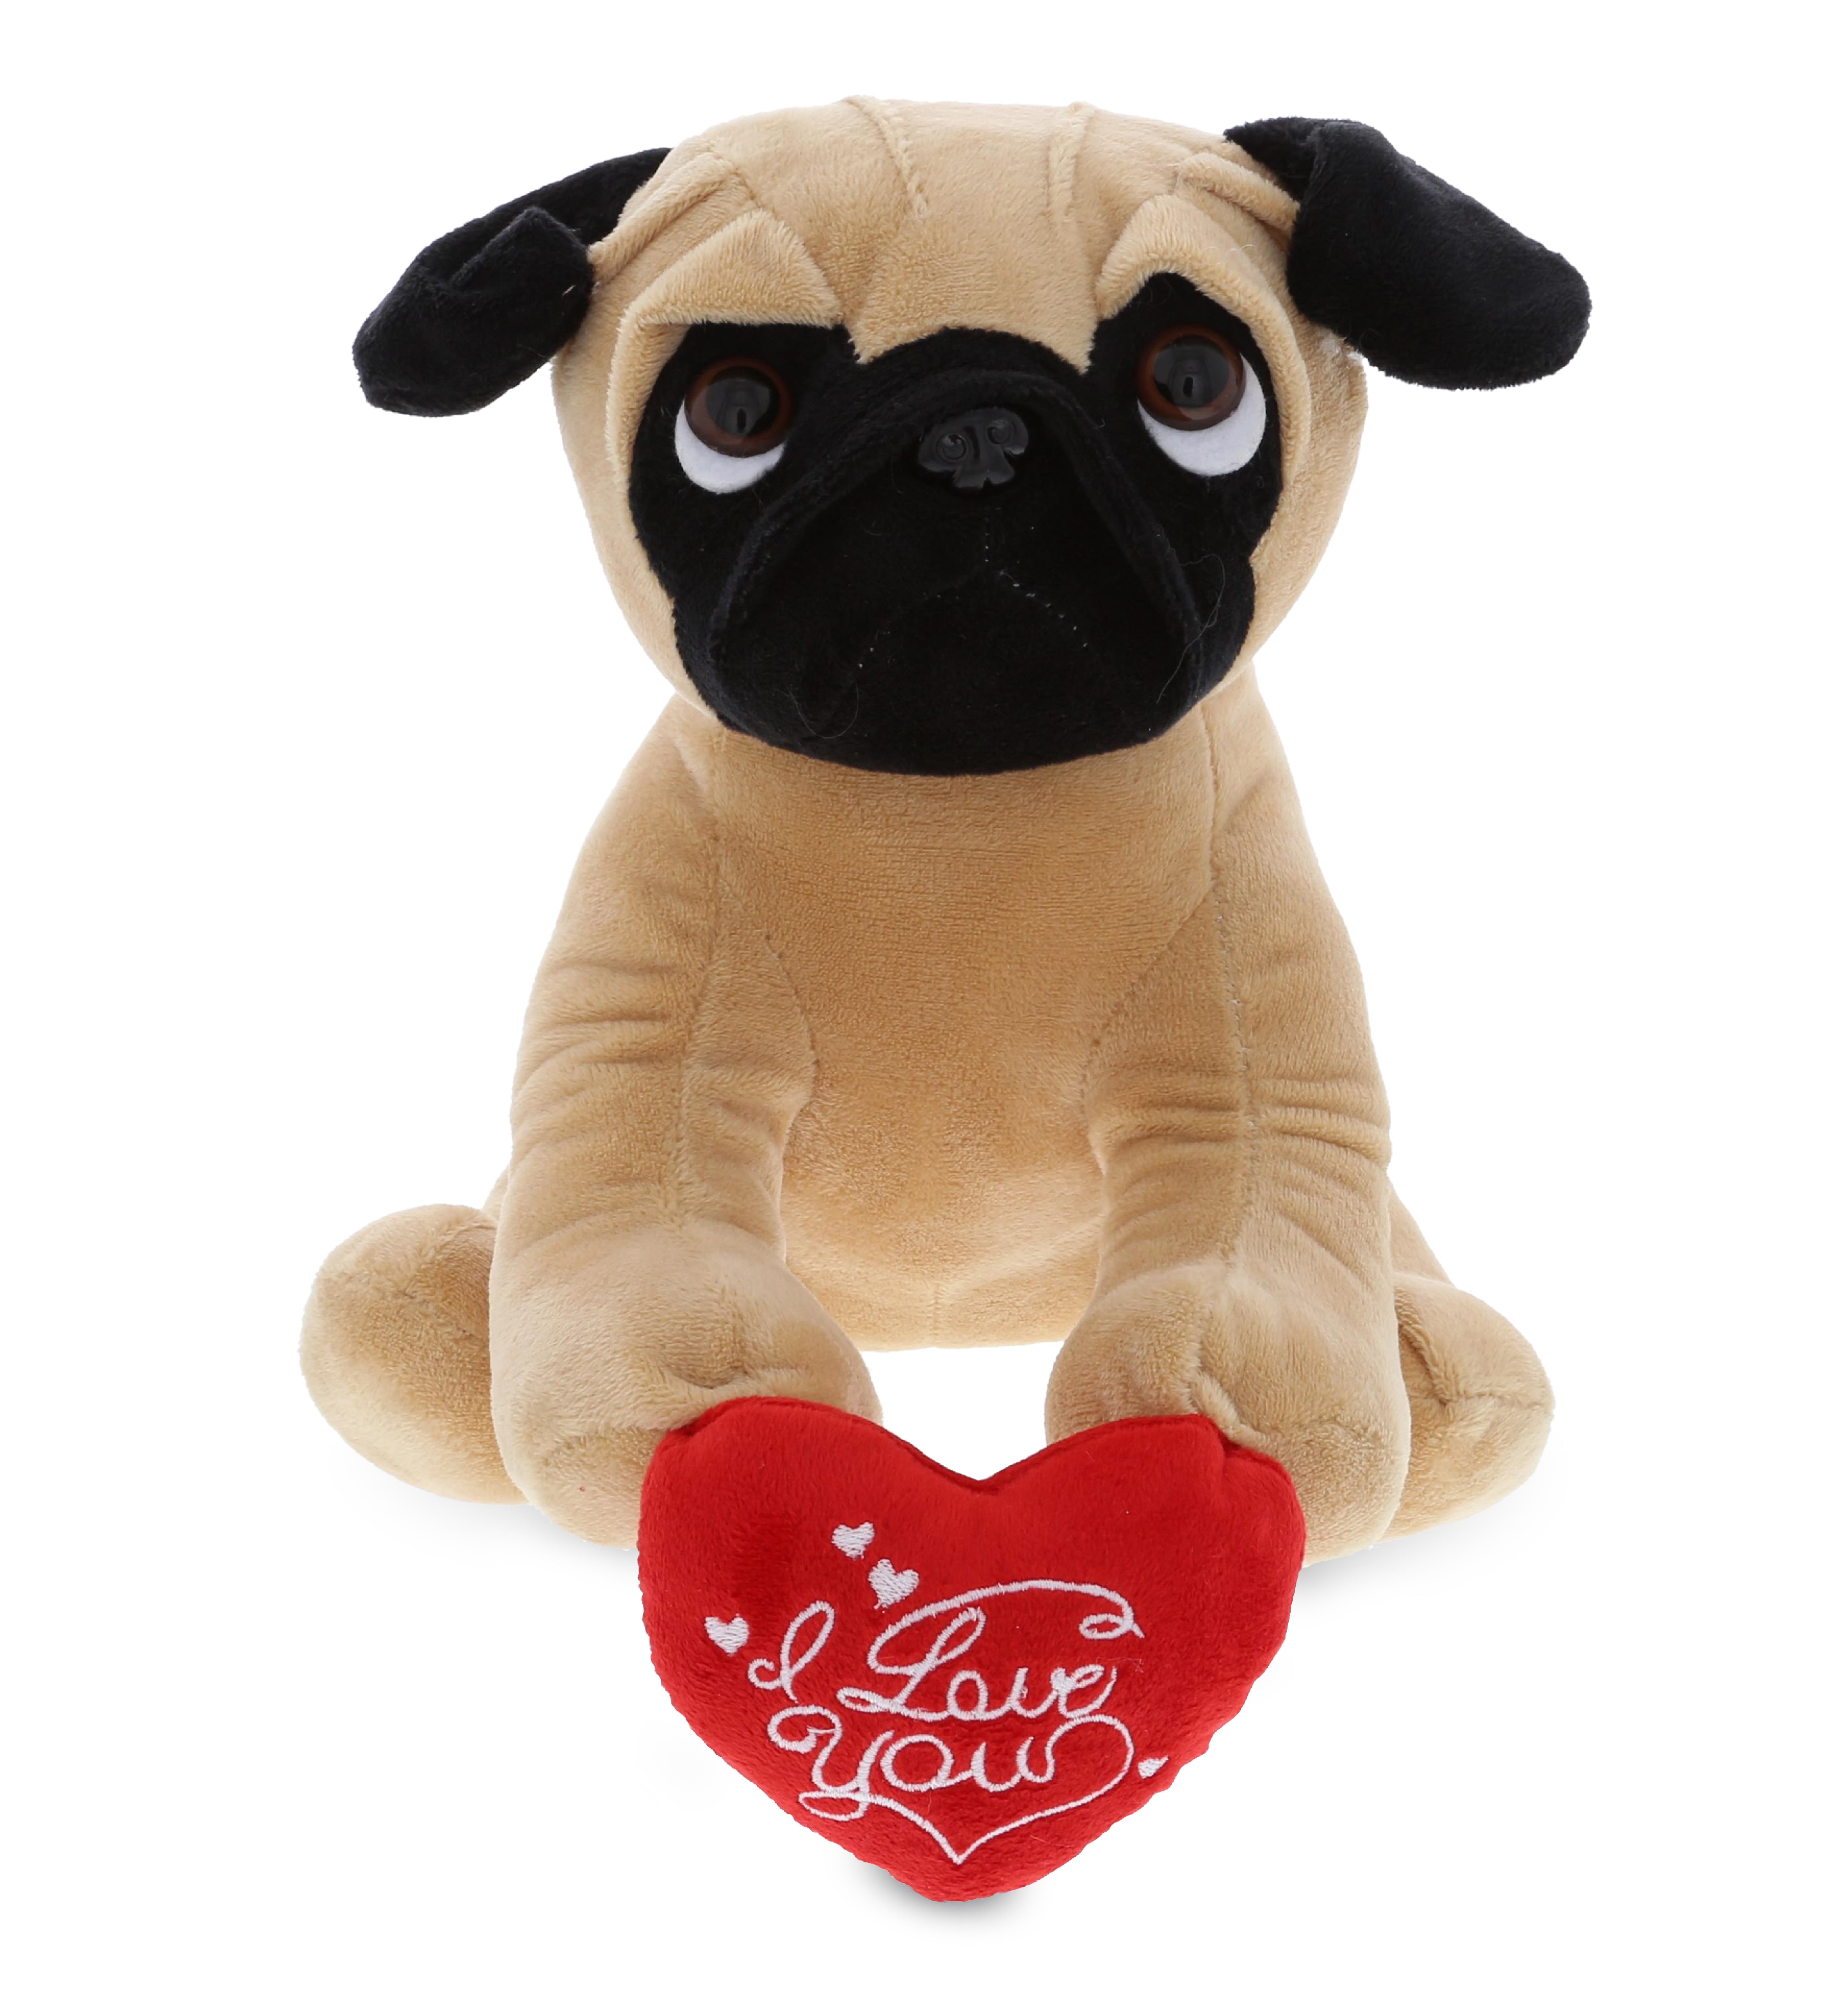 Rose Gift ideas for Him or Her Pugs & Kisses Love Stuffed Pug Dog Toy